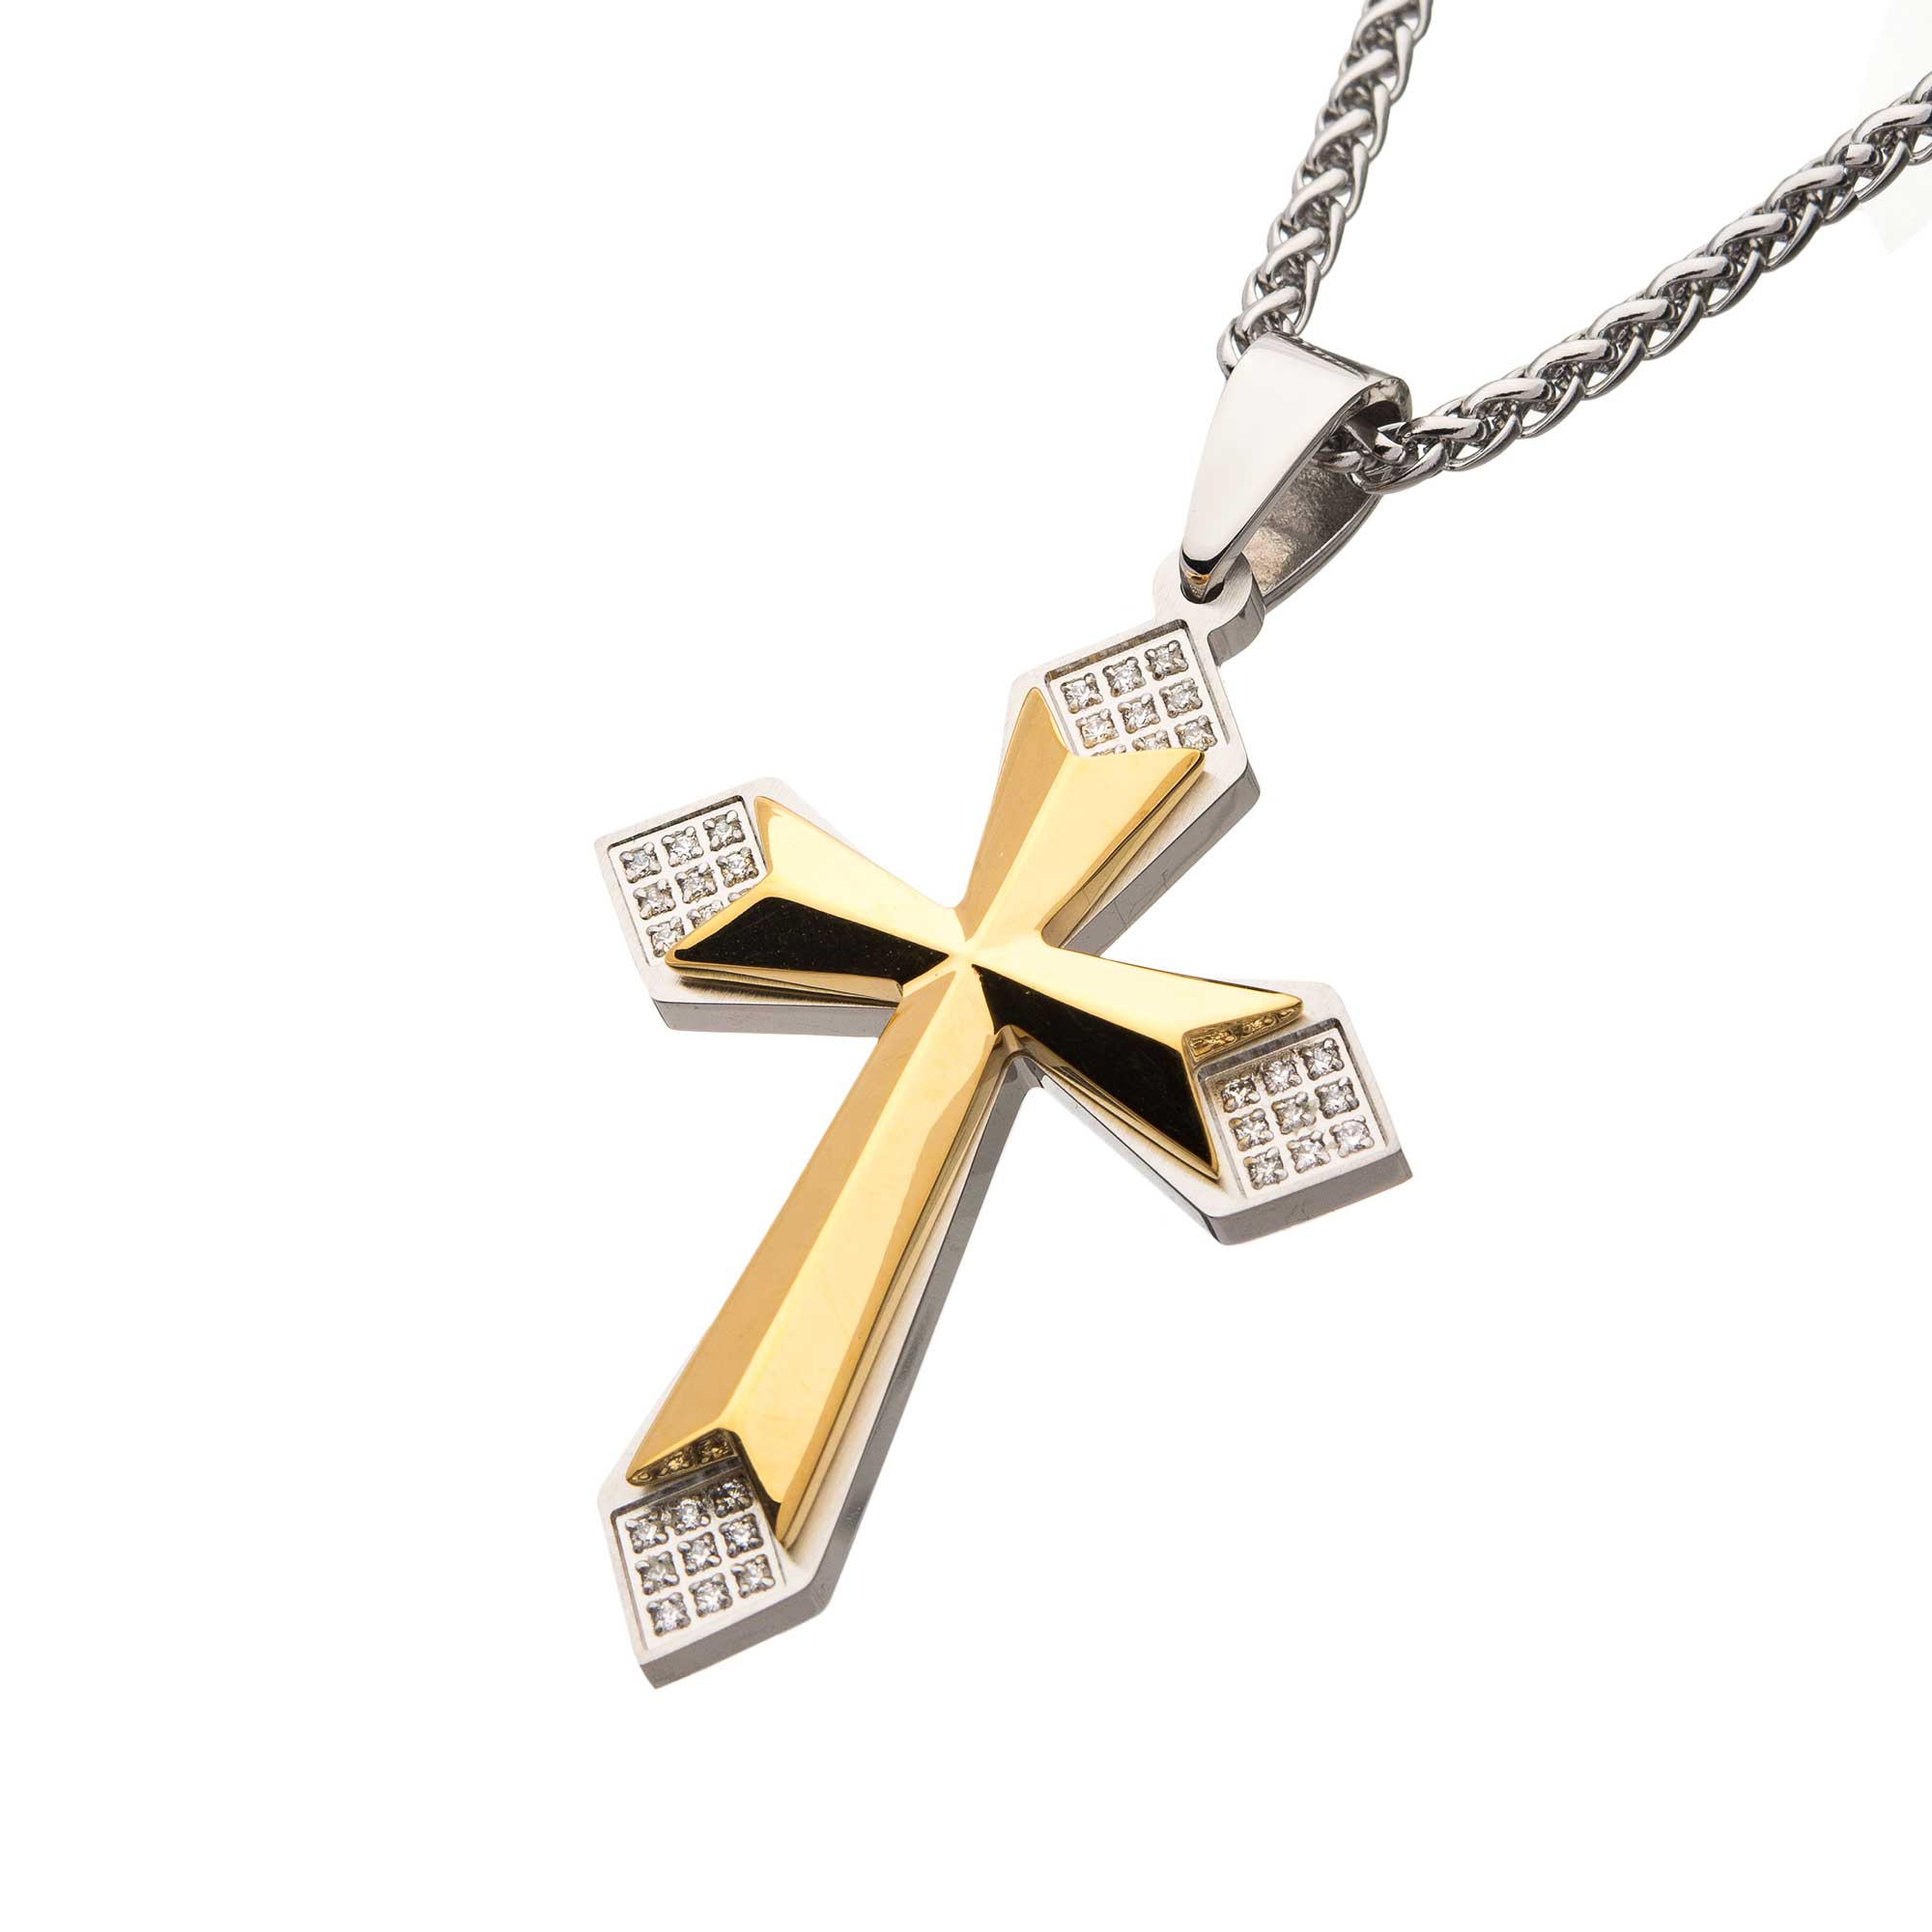 Gold Plated Cross with 36pcs CNC Prong Set Clear CZ Pendant with Steel Wheat Chain Image 2 Spath Jewelers Bartow, FL